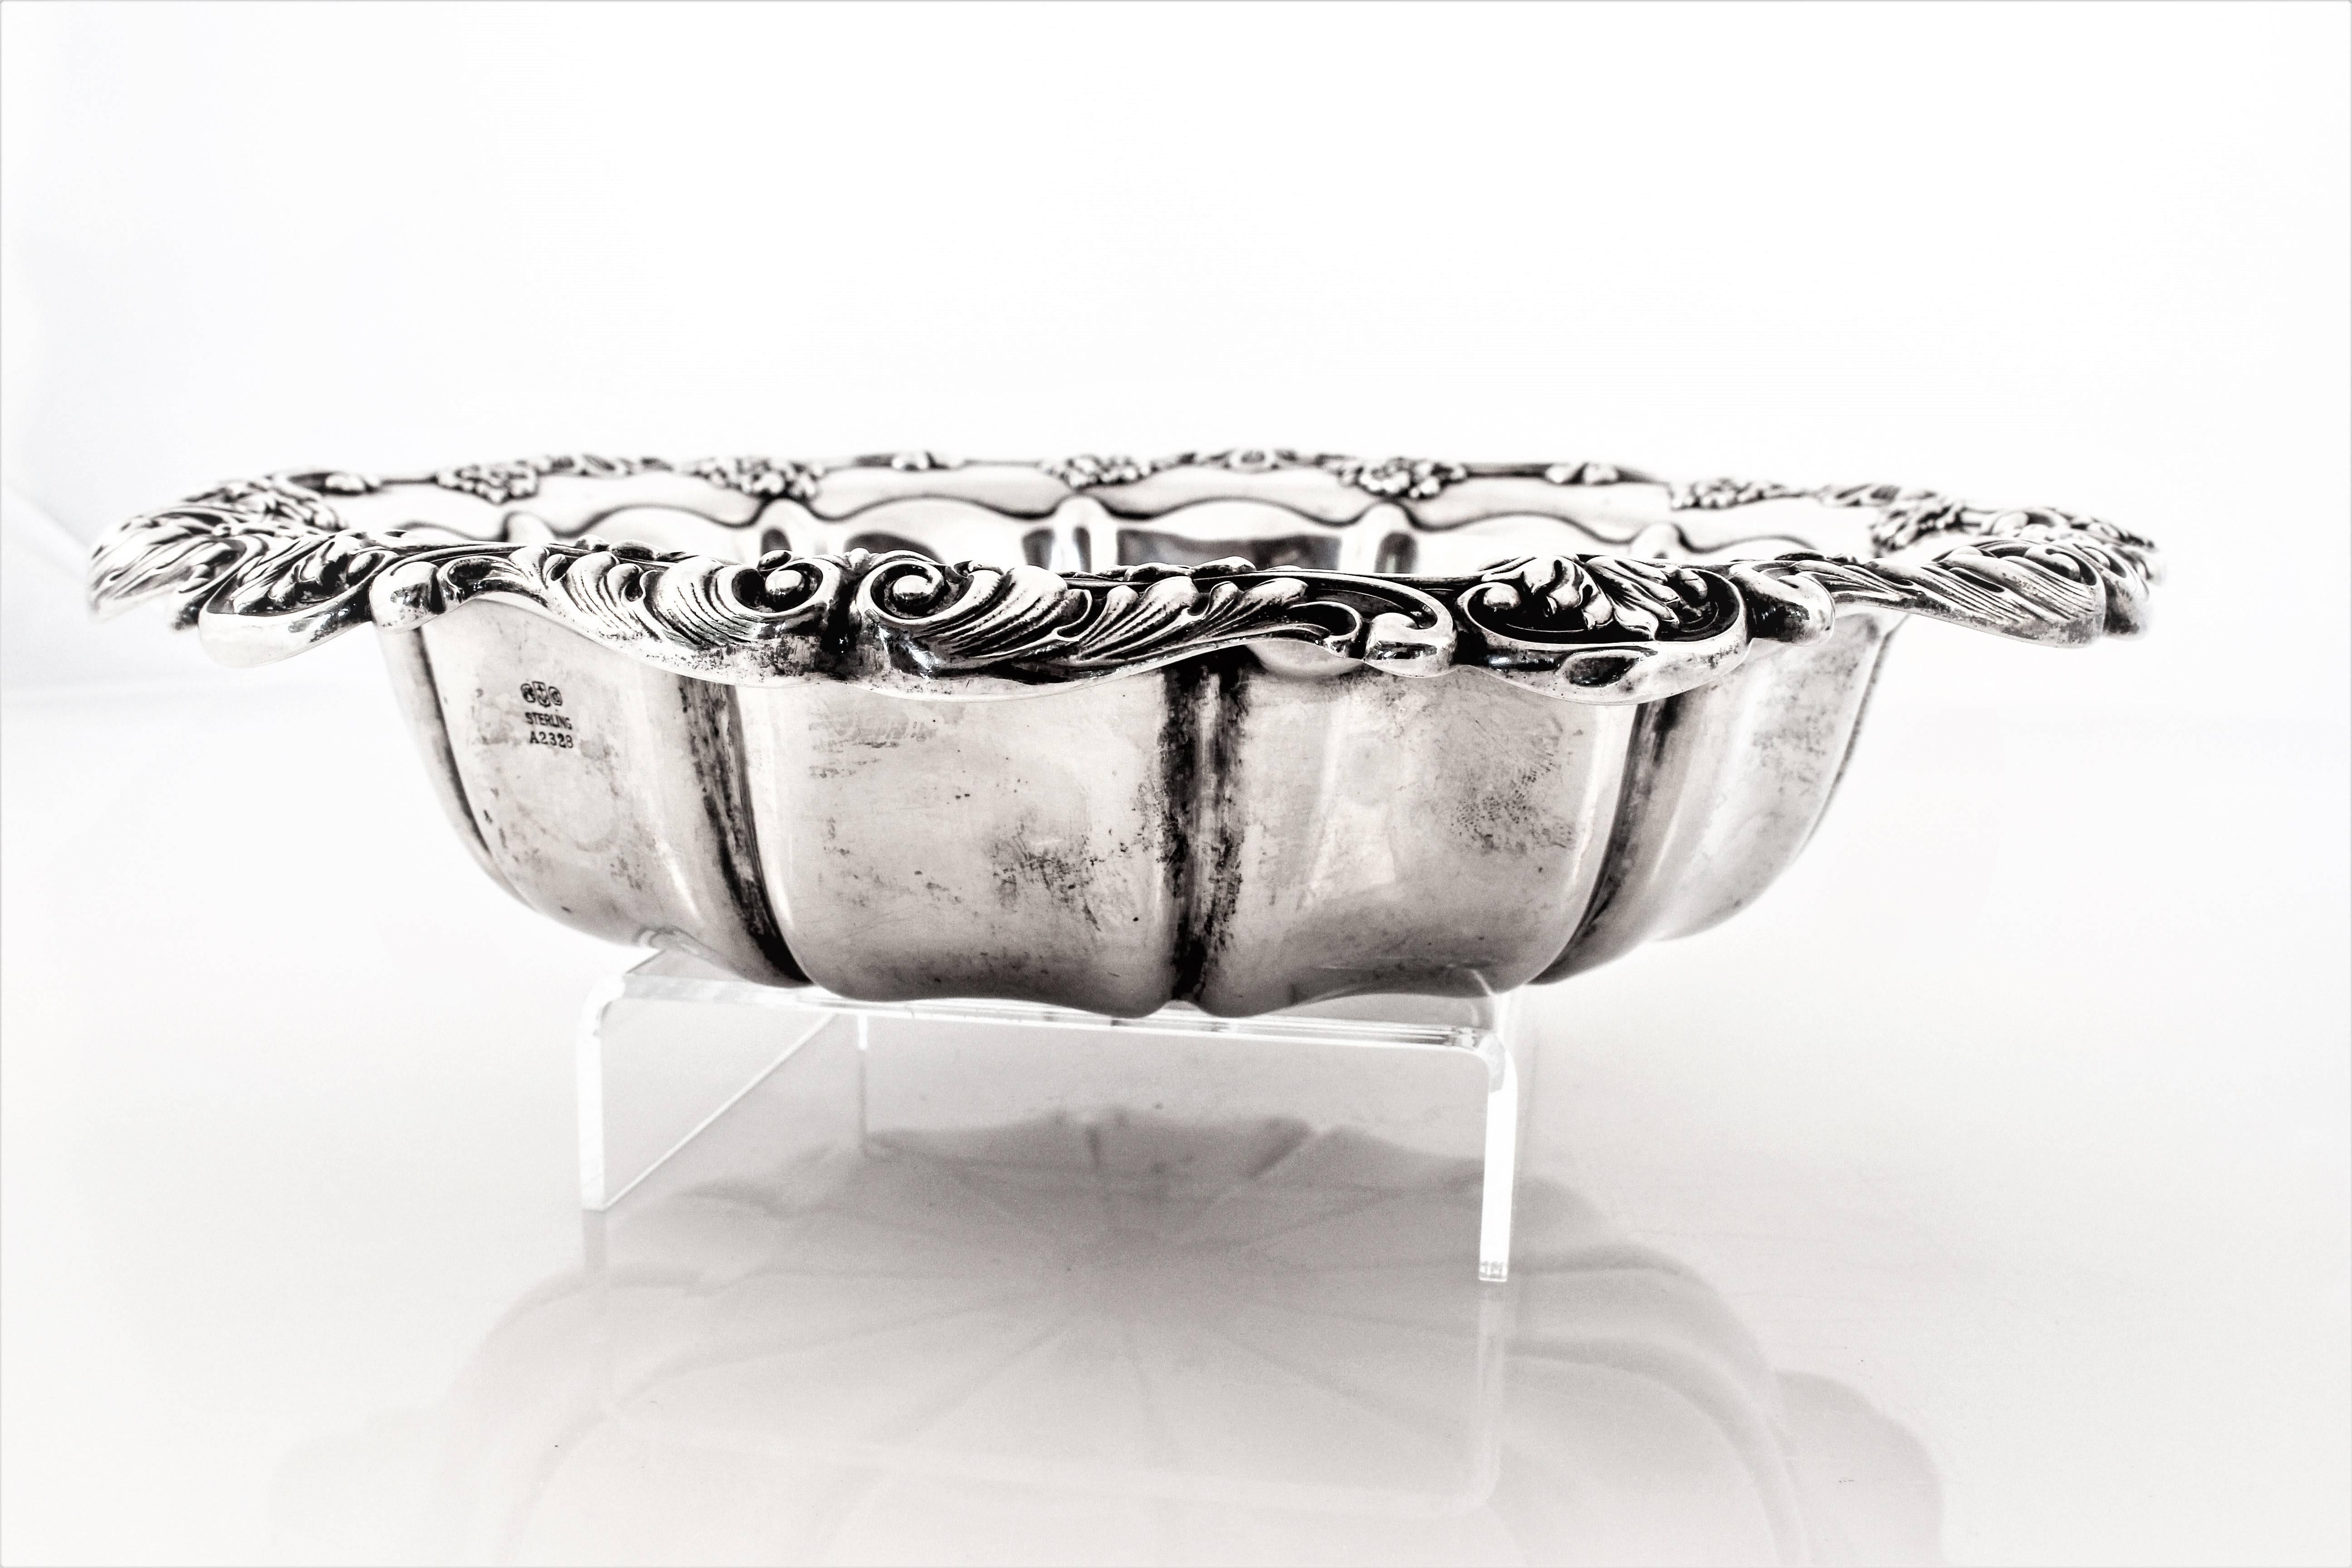 Oh how I love hand engraved sterling, don’t you? I don’t even care if it is my monogram, they are just so artful! This bowl has a lovely ornate scalloped rim with flowers and leaves every 2 inches.